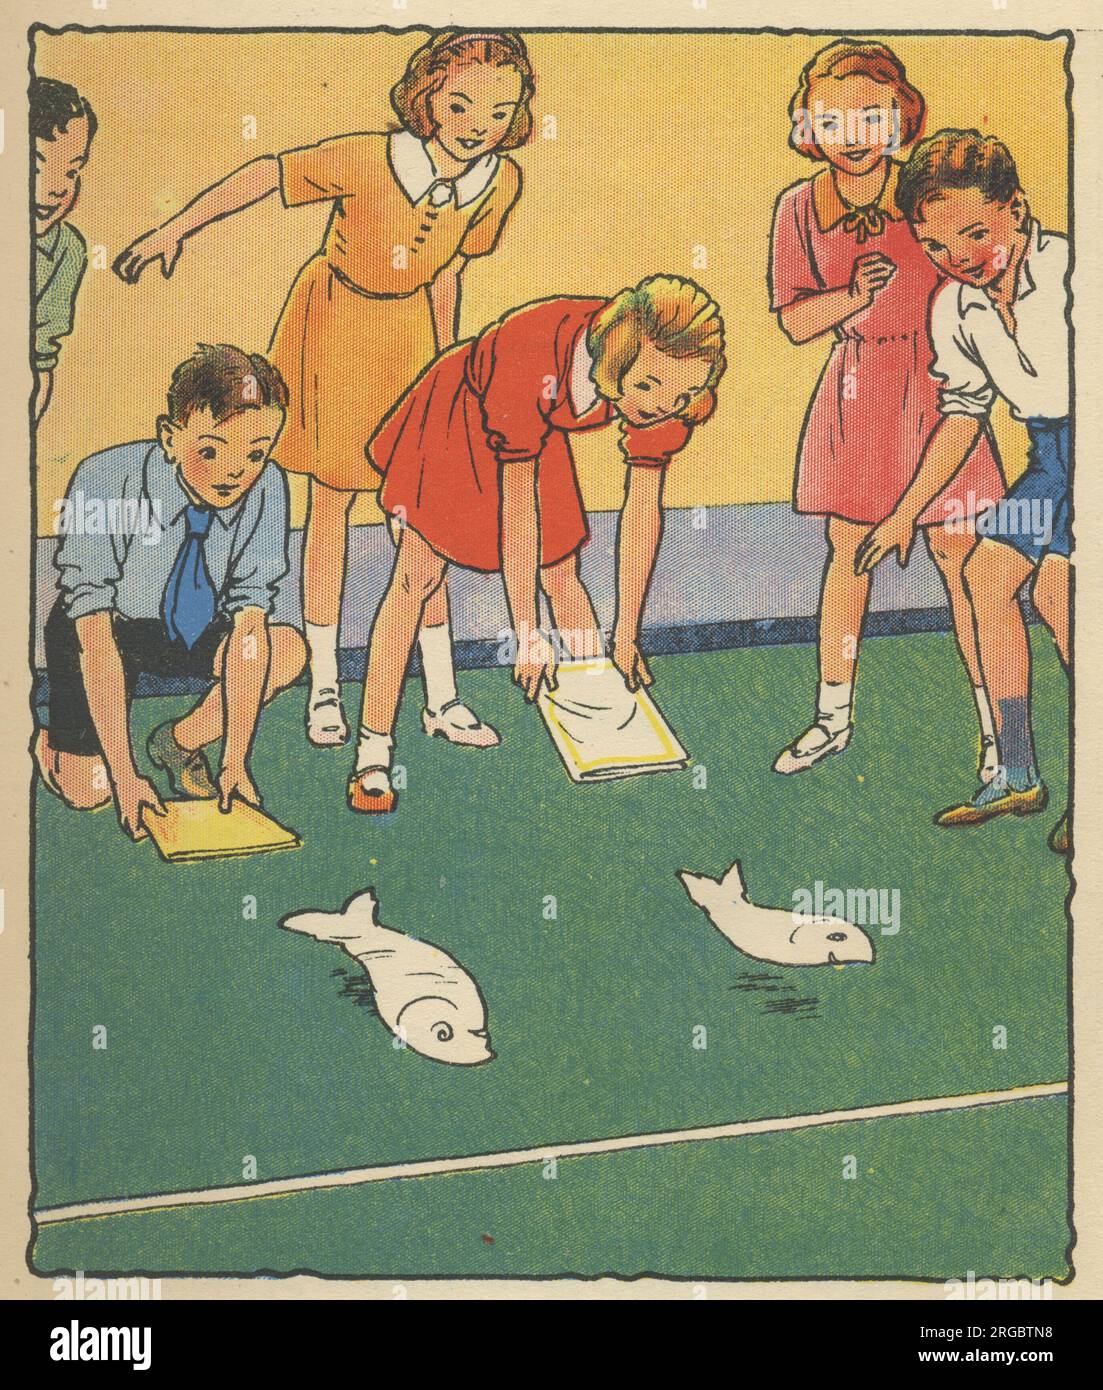 Children playing a game of Flap the Kipper. Cut two fish shapes out of thin paper and lay them parallel. Then two children, each armed with an exercise book, flap hard behind the fishes (but never touching them) to see who can be the first to blow their fish over the line. Stock Photo